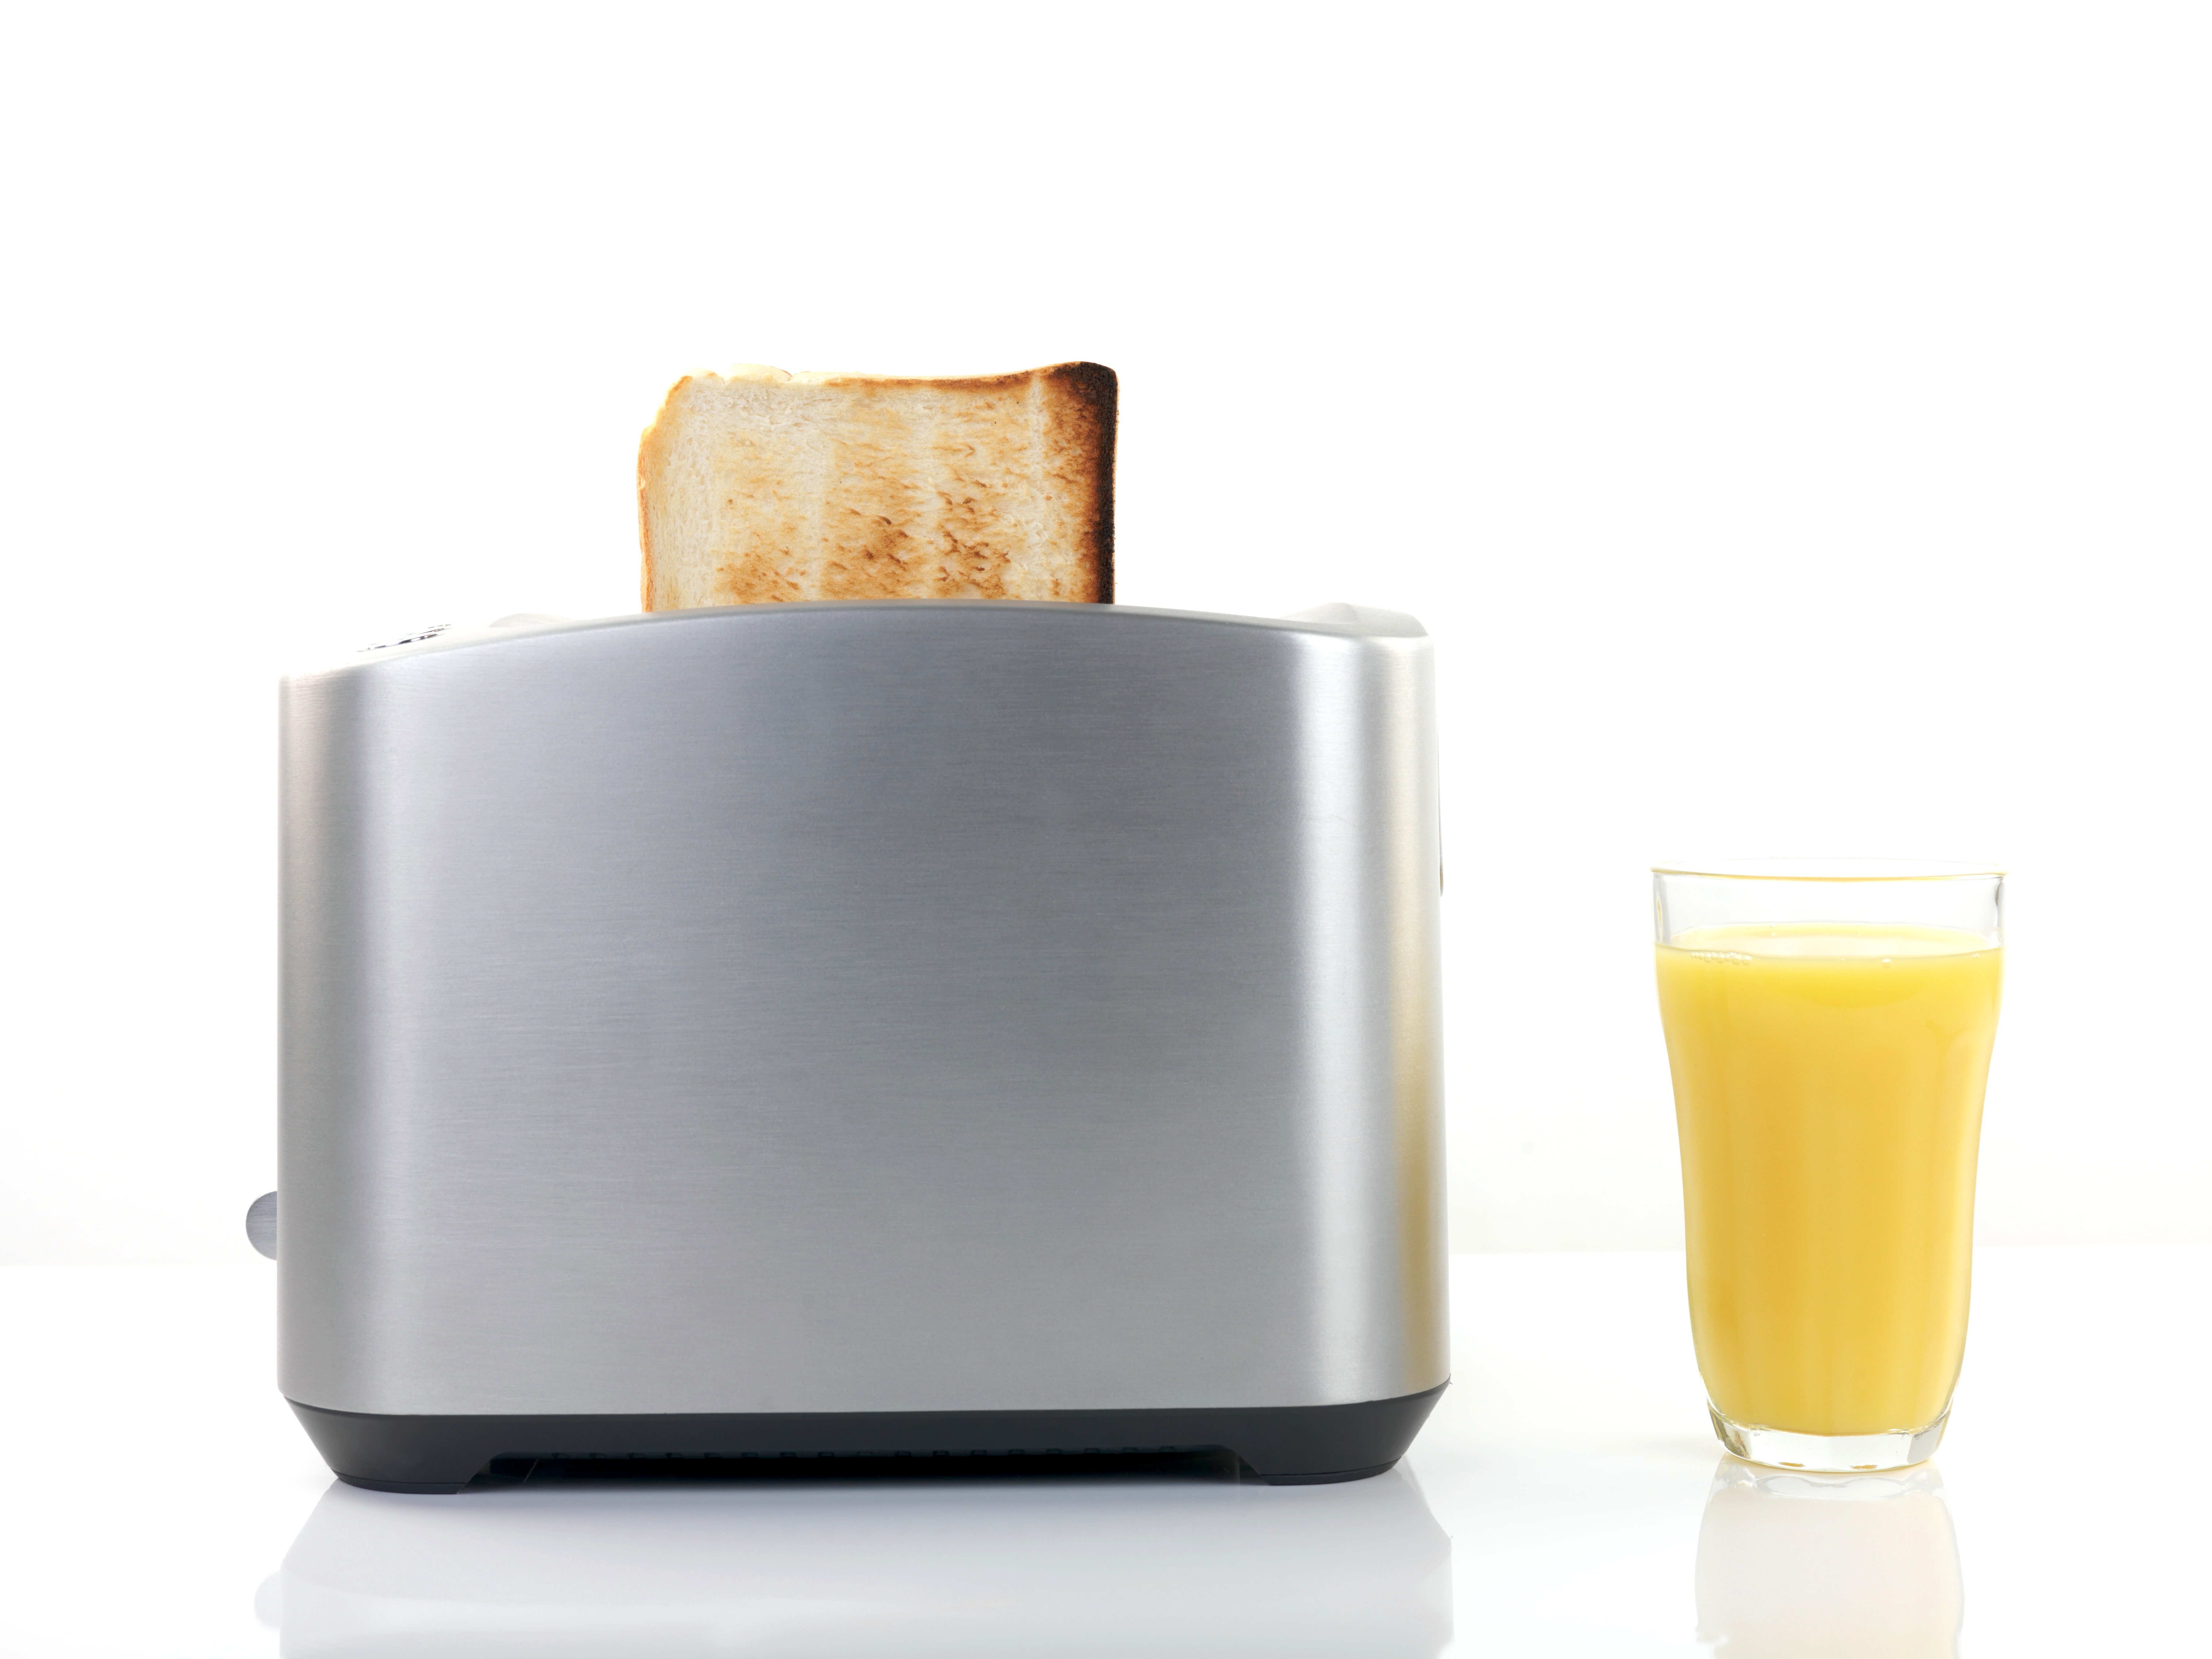 Pop-up Toasters